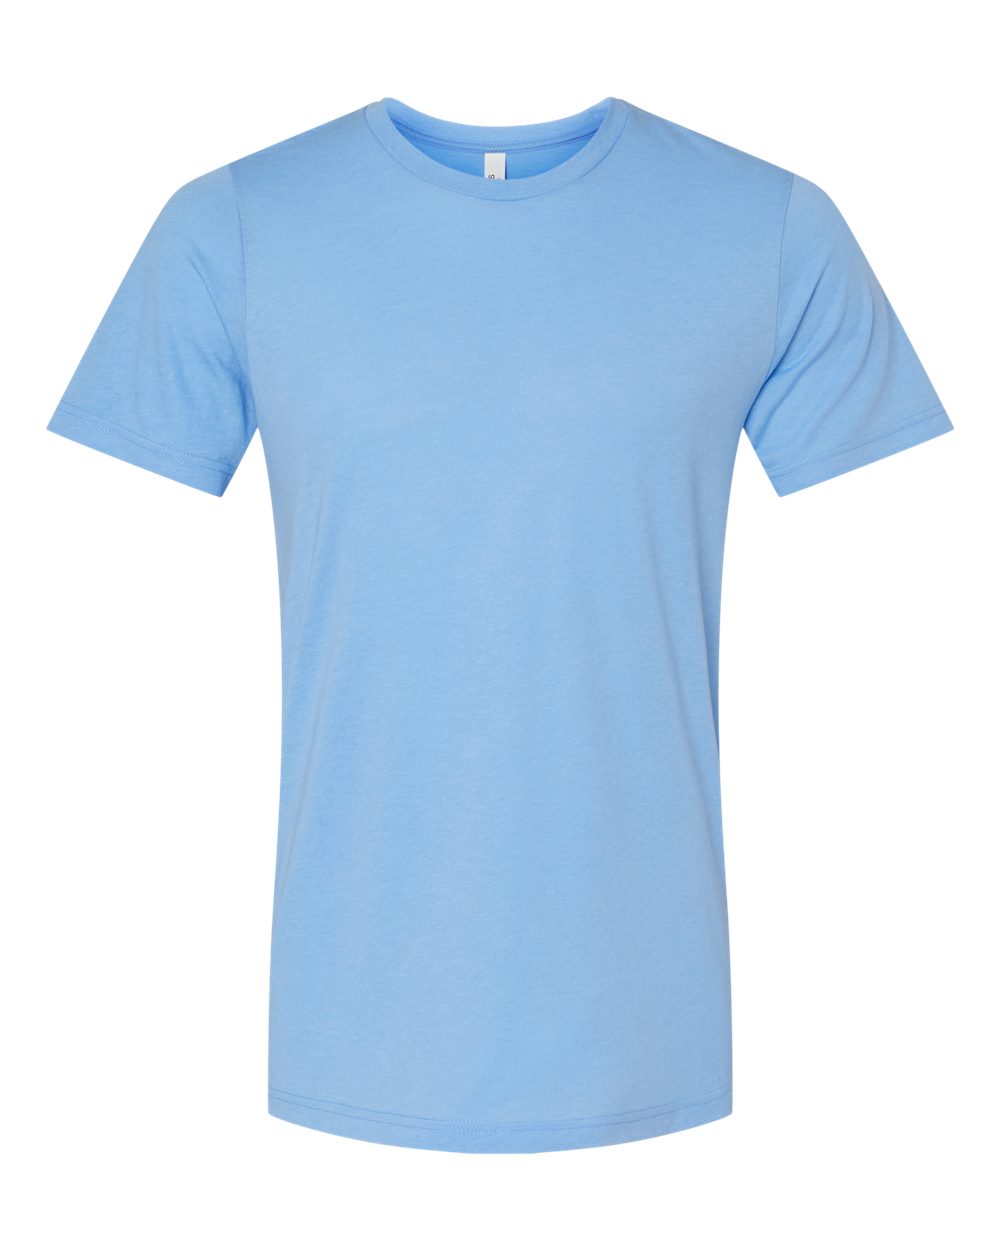 Bella + Canvas Triblend Tee (3413) in Solid Blue Triblend